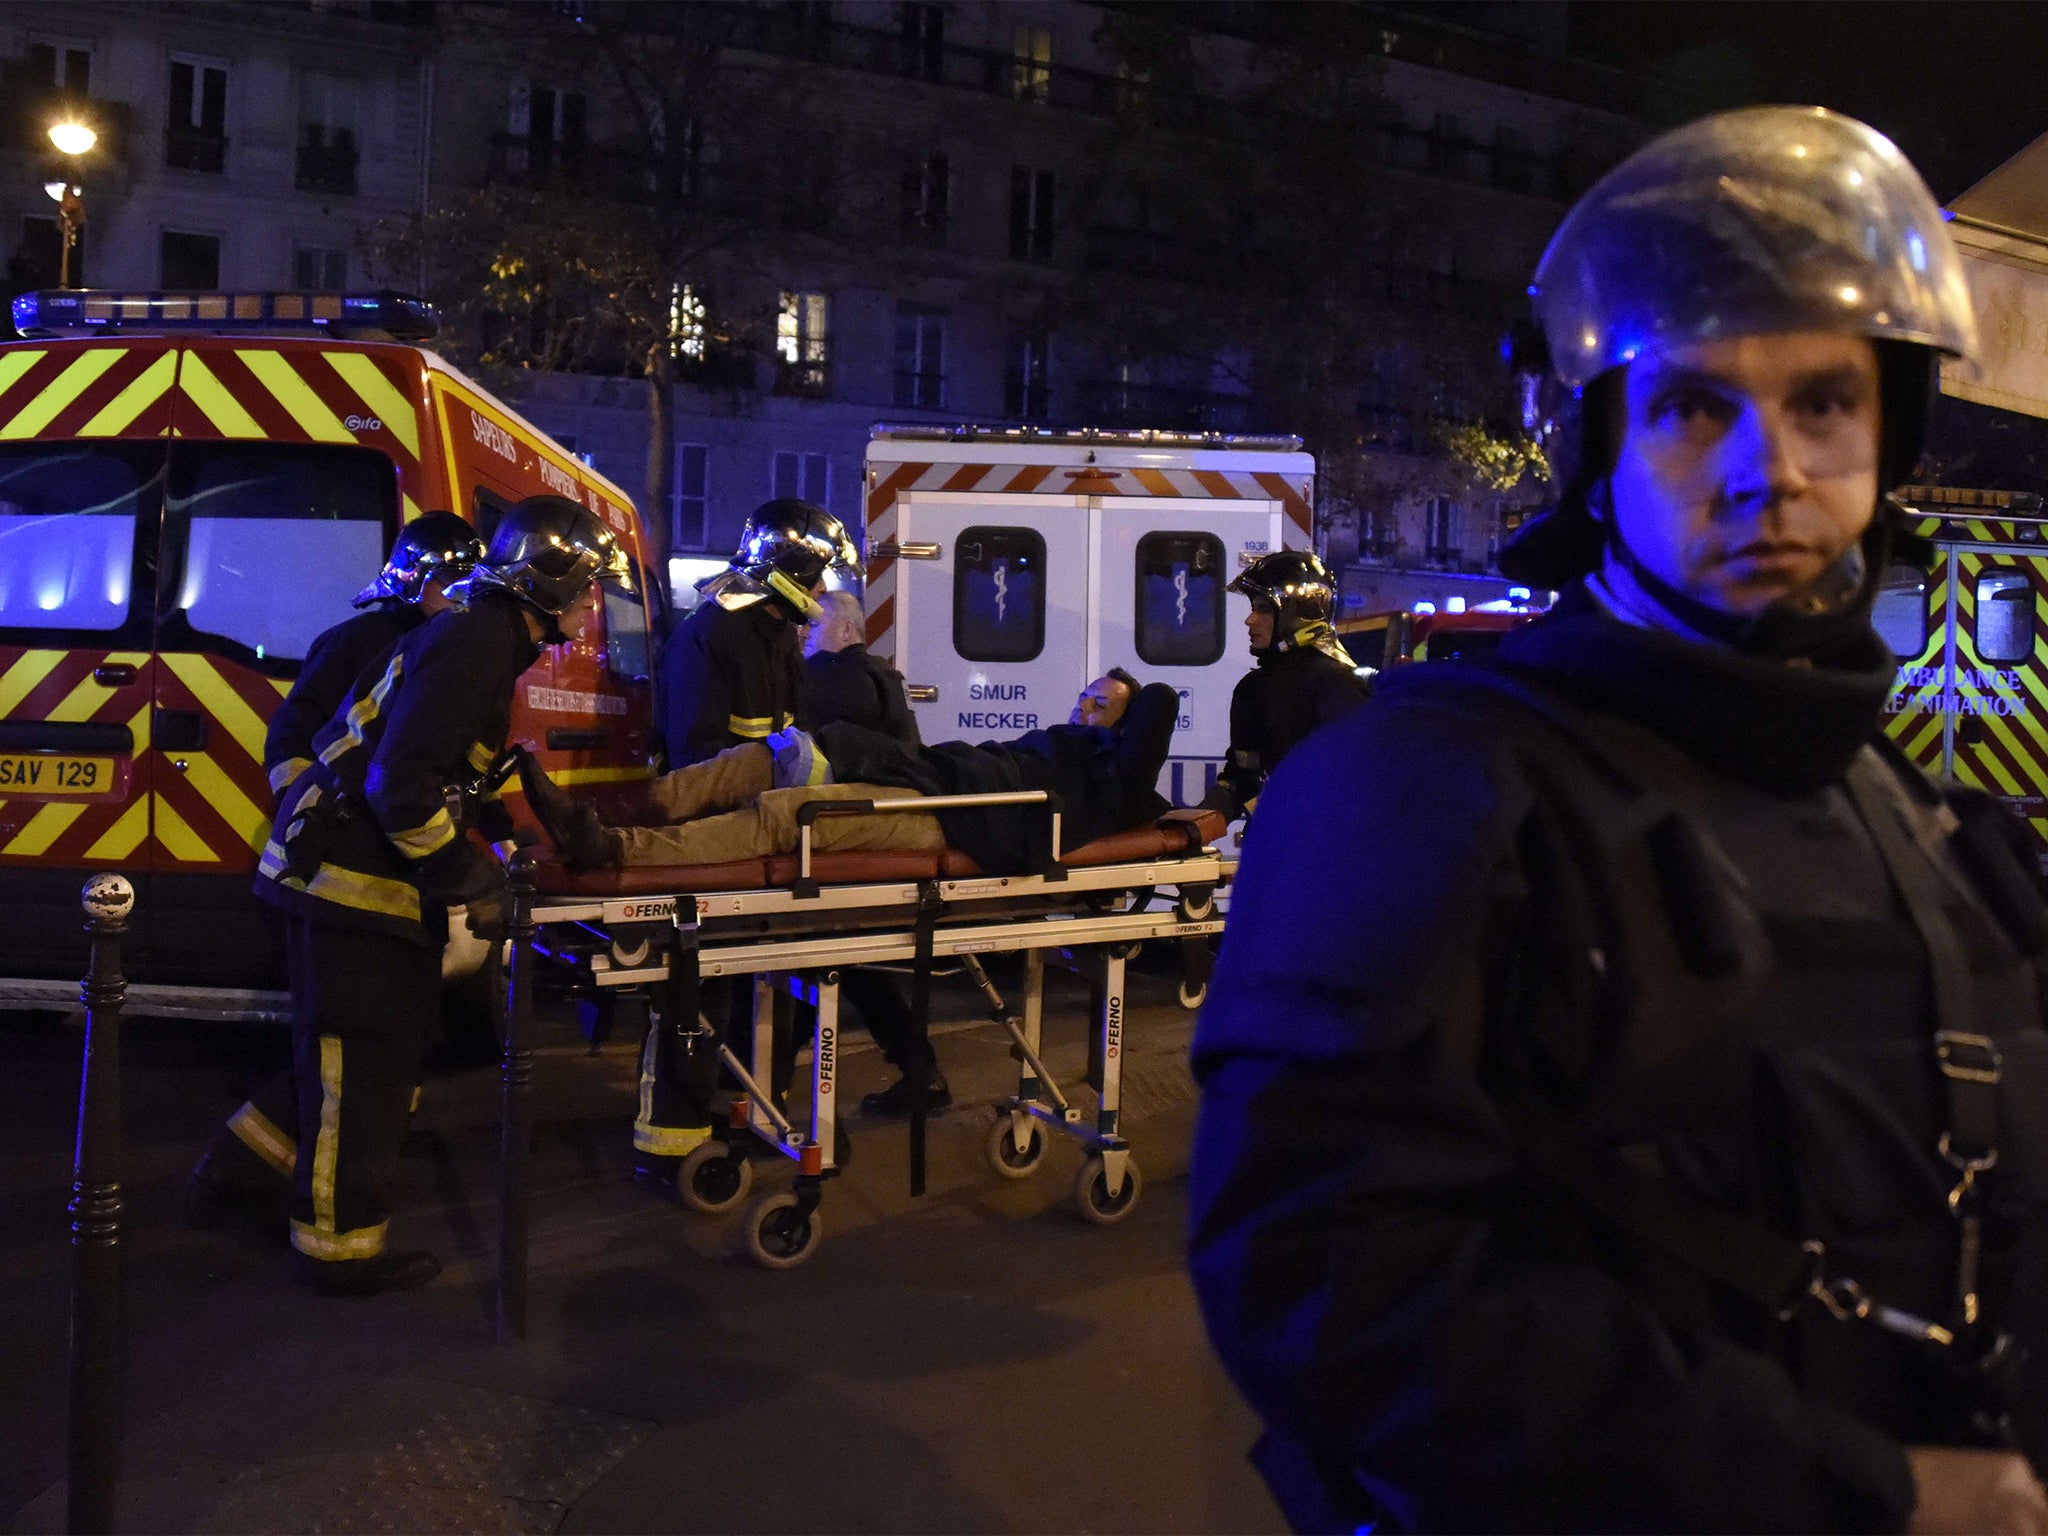 Rescuers workers evacuate a man on a stretcher near the Bataclan concert hall in central Paris